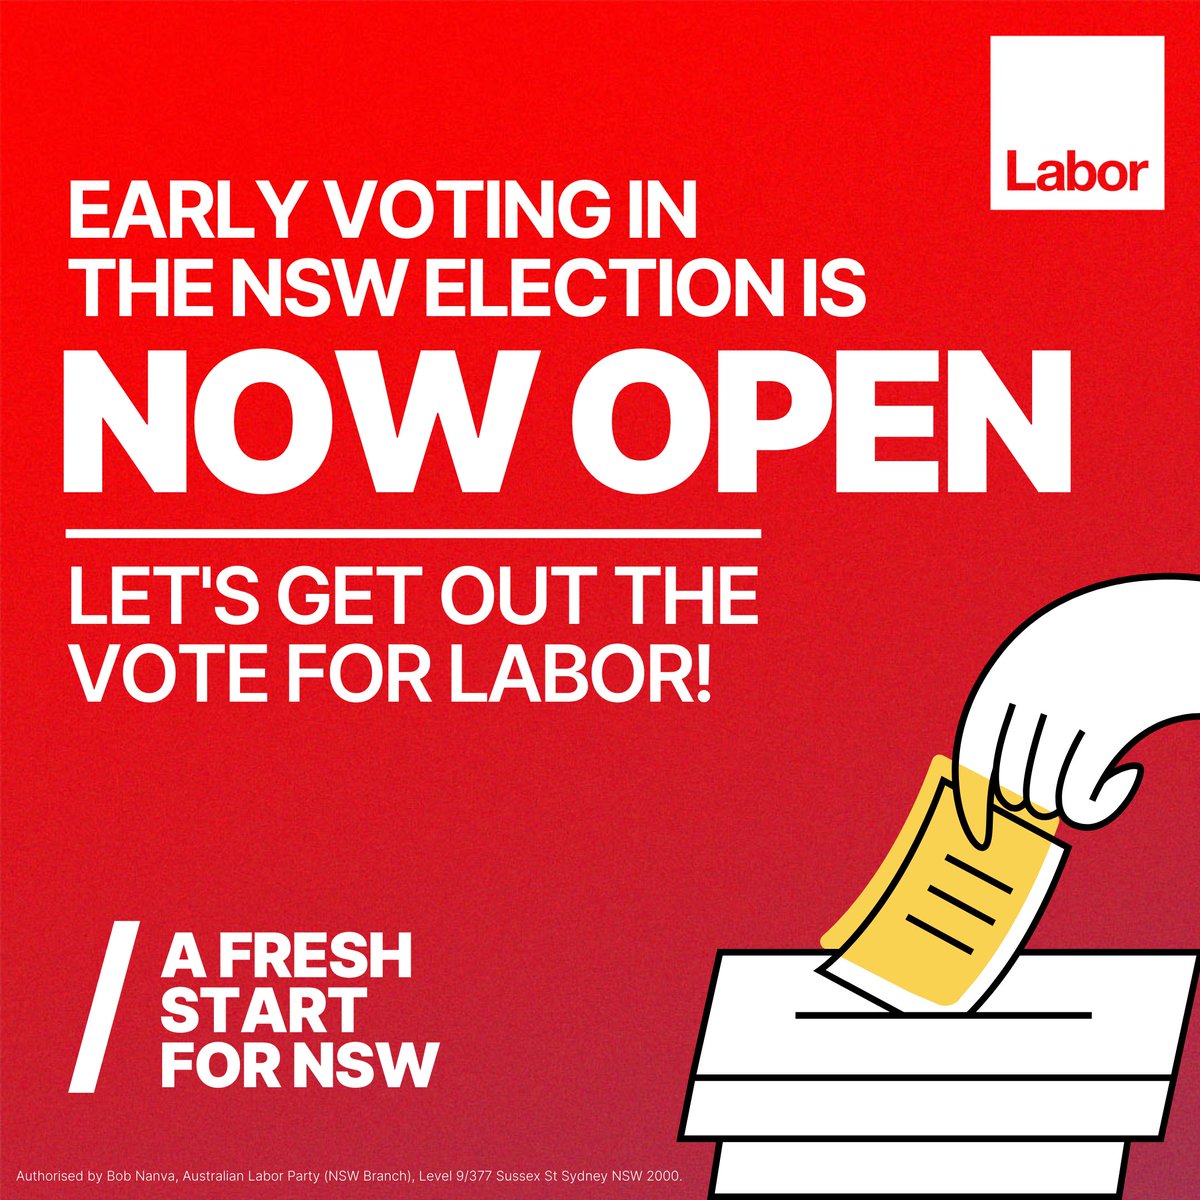 IT'S TIME TO VOTE LABOR  Find out how to vote for your local Labo...